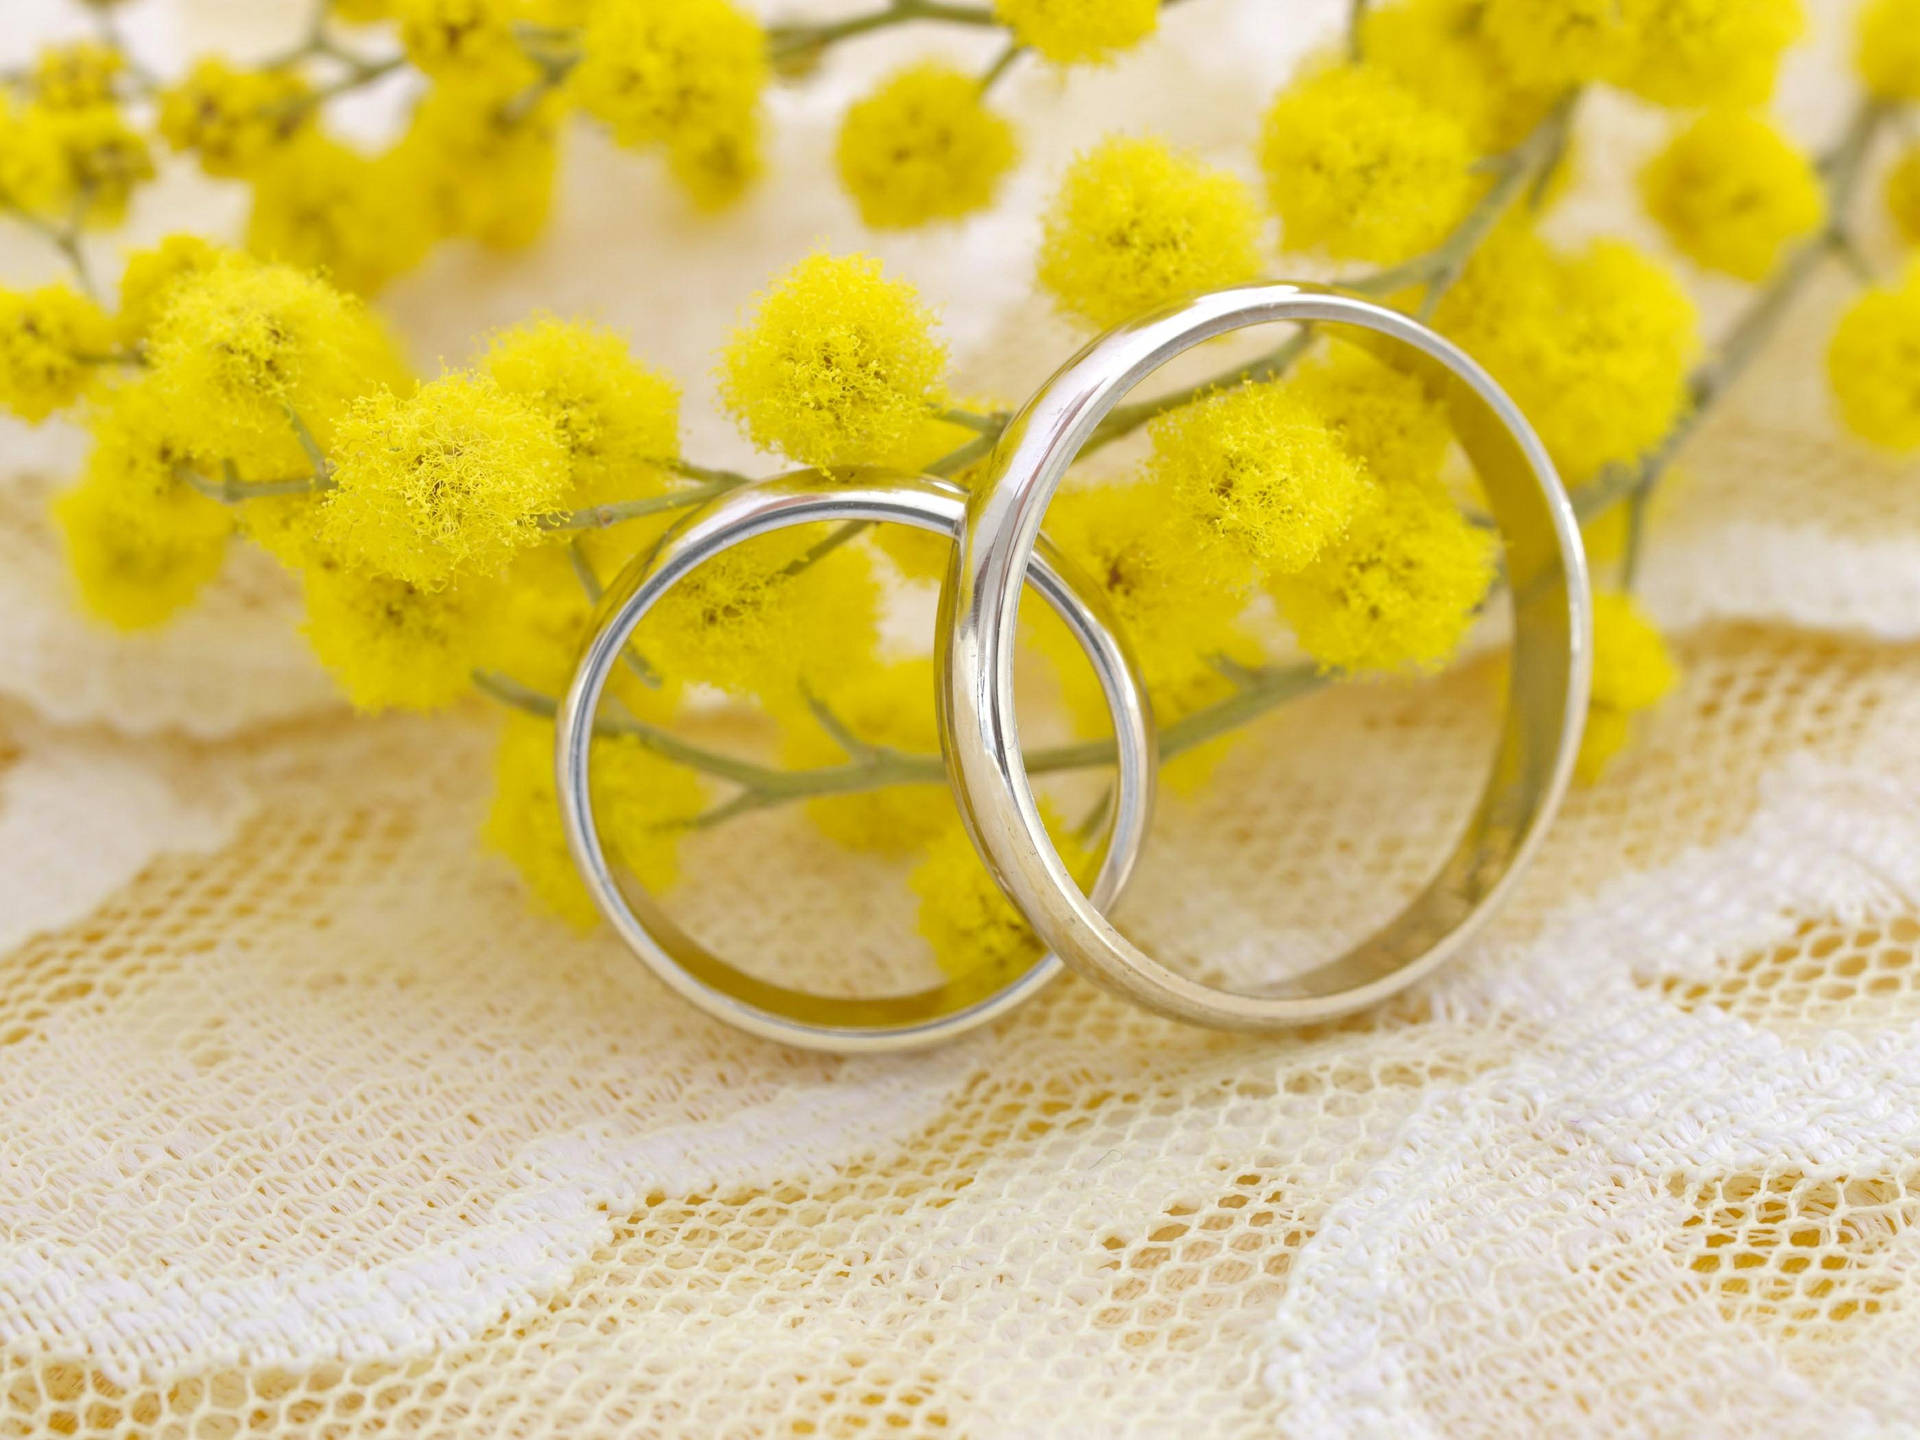 Mimosa Flowers And Rings Background